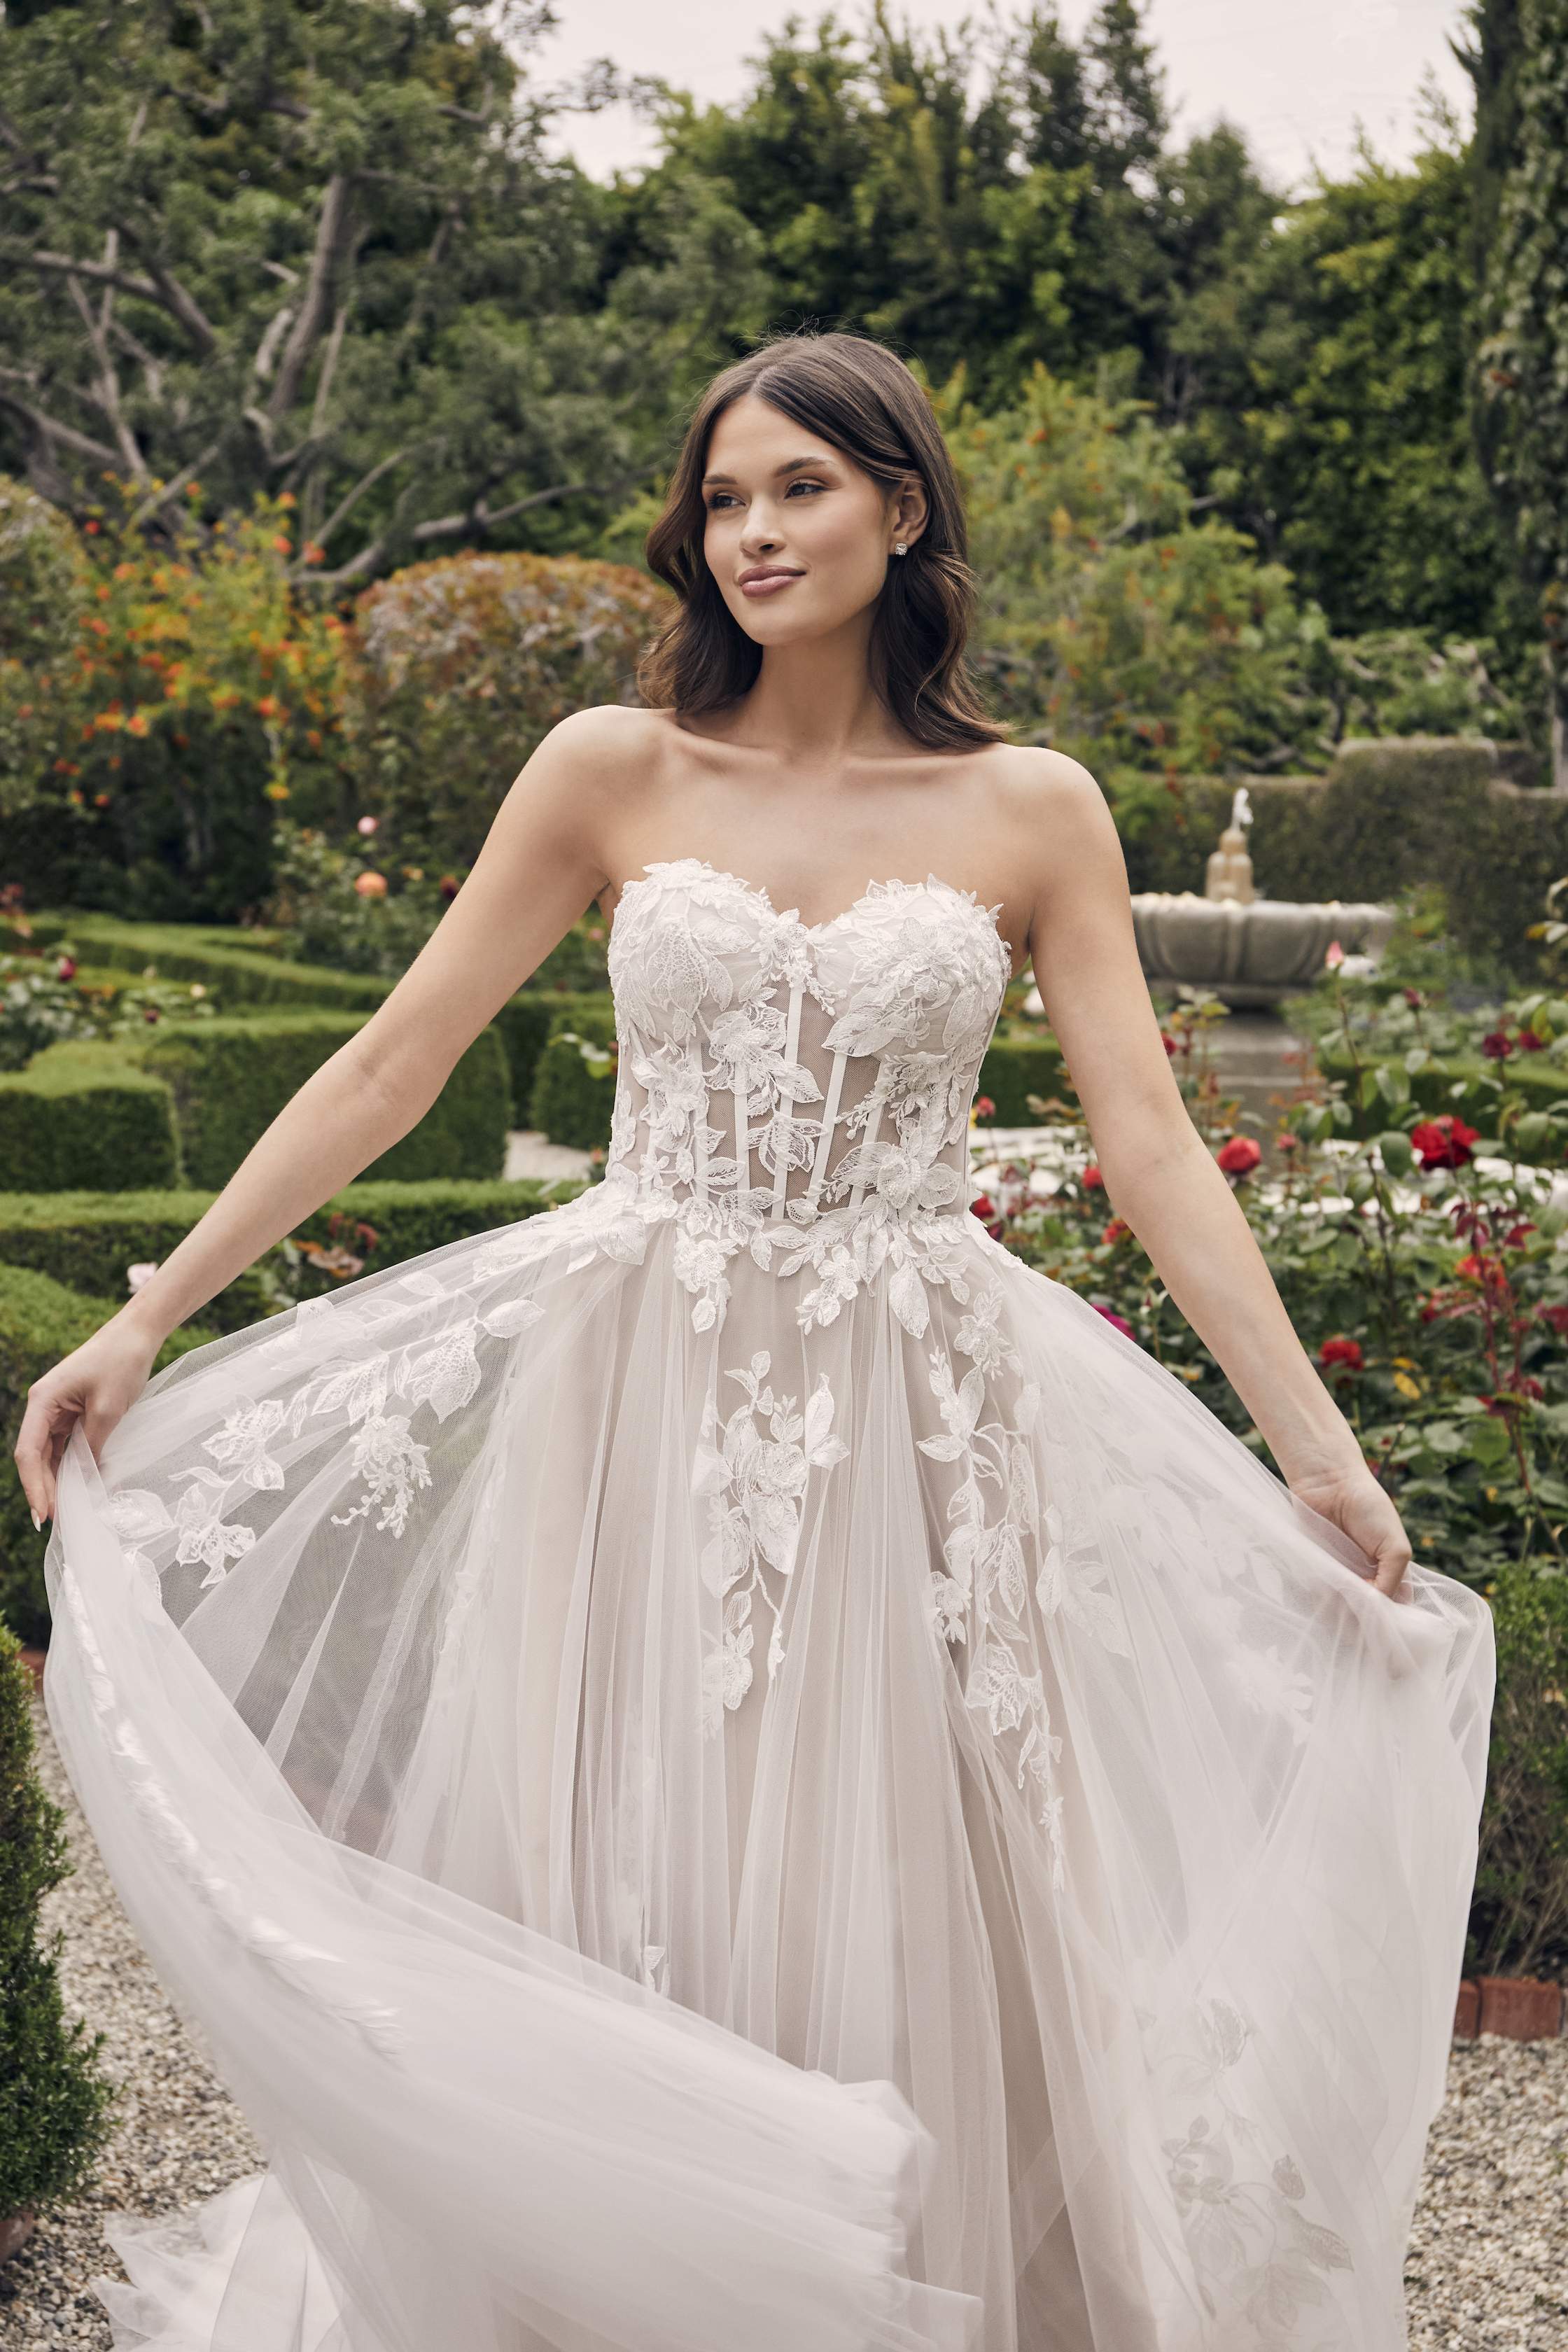 7 Floral Wedding Dresses You Will Love For Your Summer Nuptials